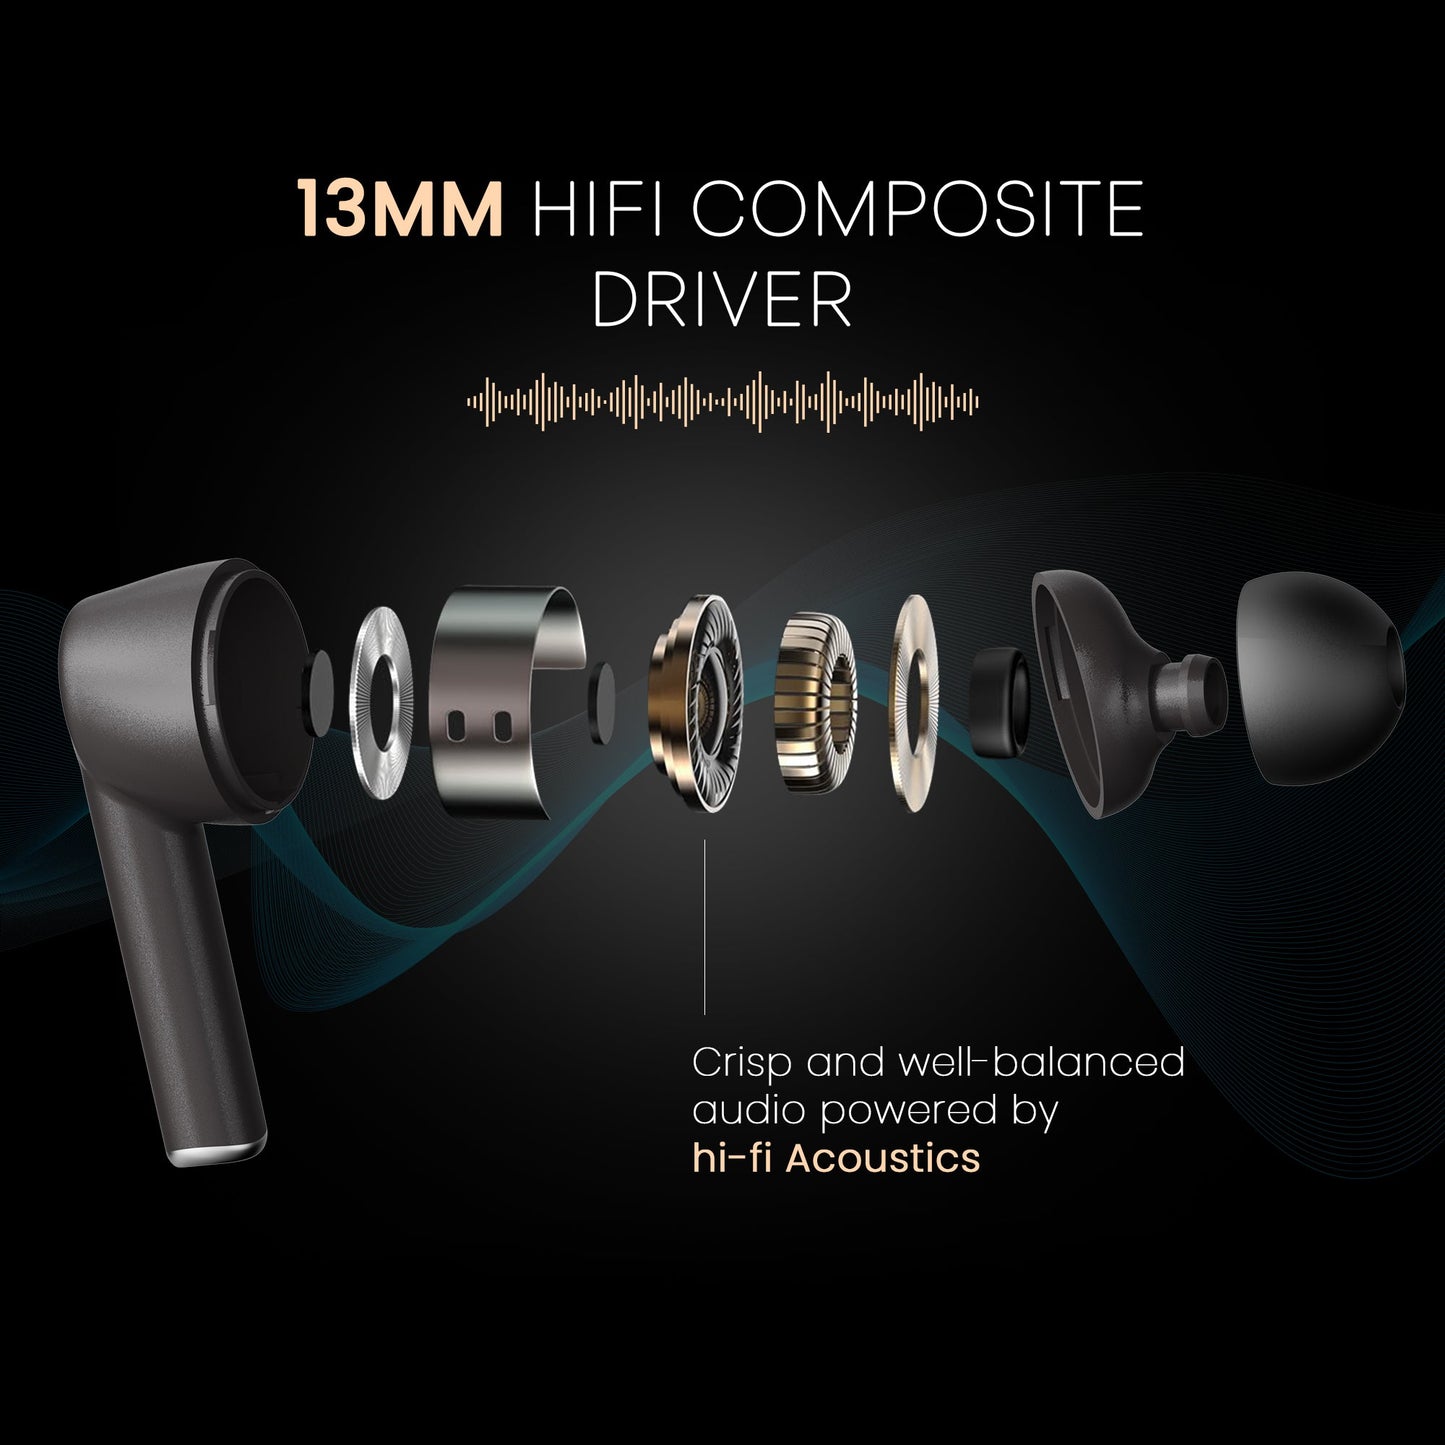 GIZMORE ELITE 852 ANC with 36dB Type-C Fast Charging TWS Up to 50H Playtime ENC with DNS  40ms Low Latency for Gaming  Insta Wake N Pair BT v5.3 13MM Driver Voice Assistant Earbuds